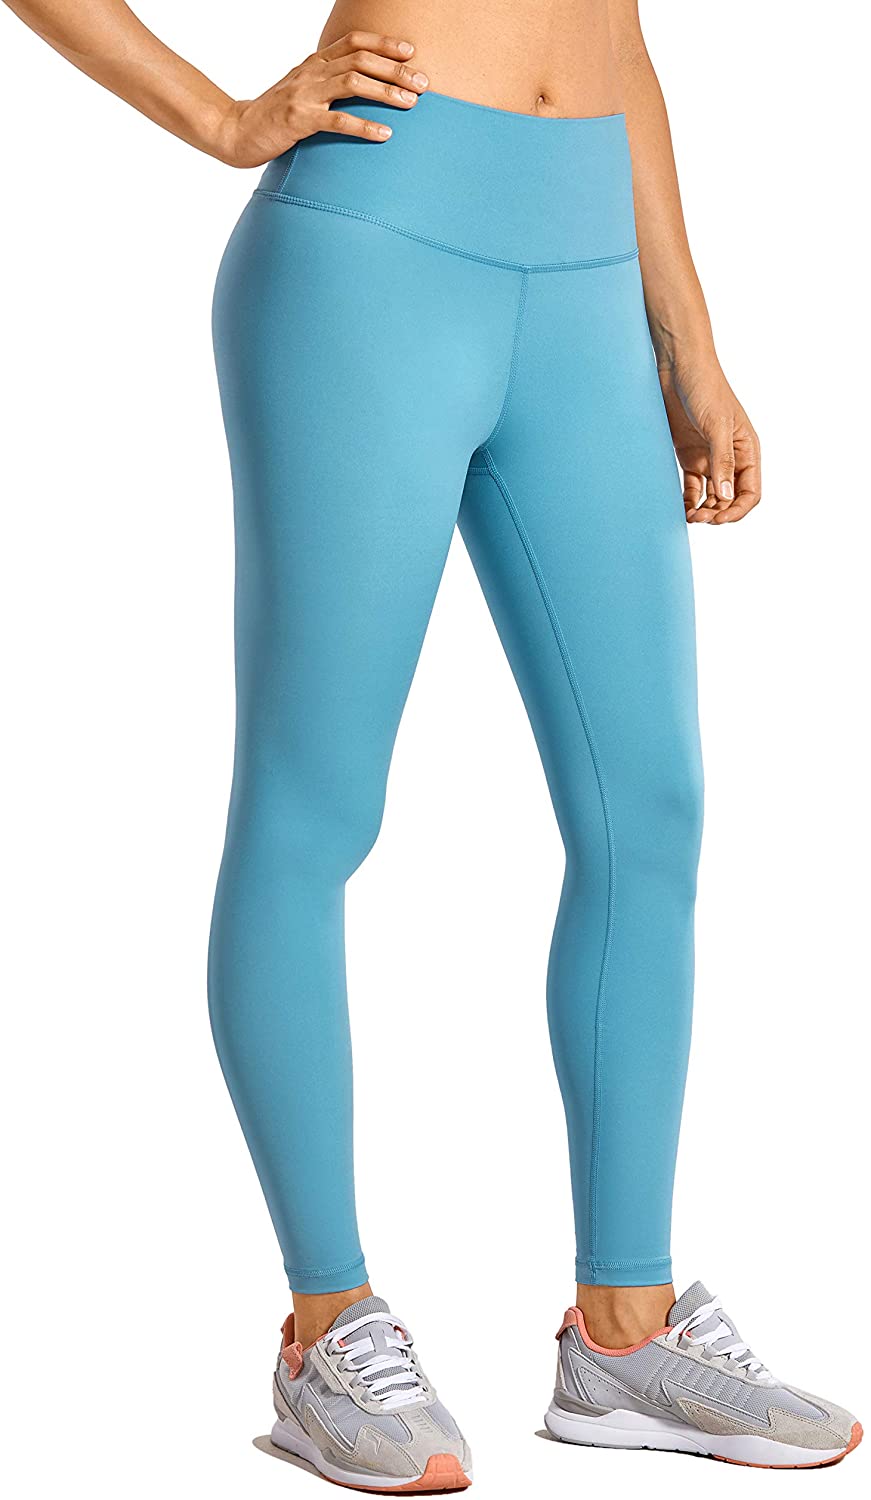 Buy CRZ YOGA Women's Non-See Through Athletic Compression Leggings Hugged  Feeling Tummy Control Workout Leggings 25&28 inches online